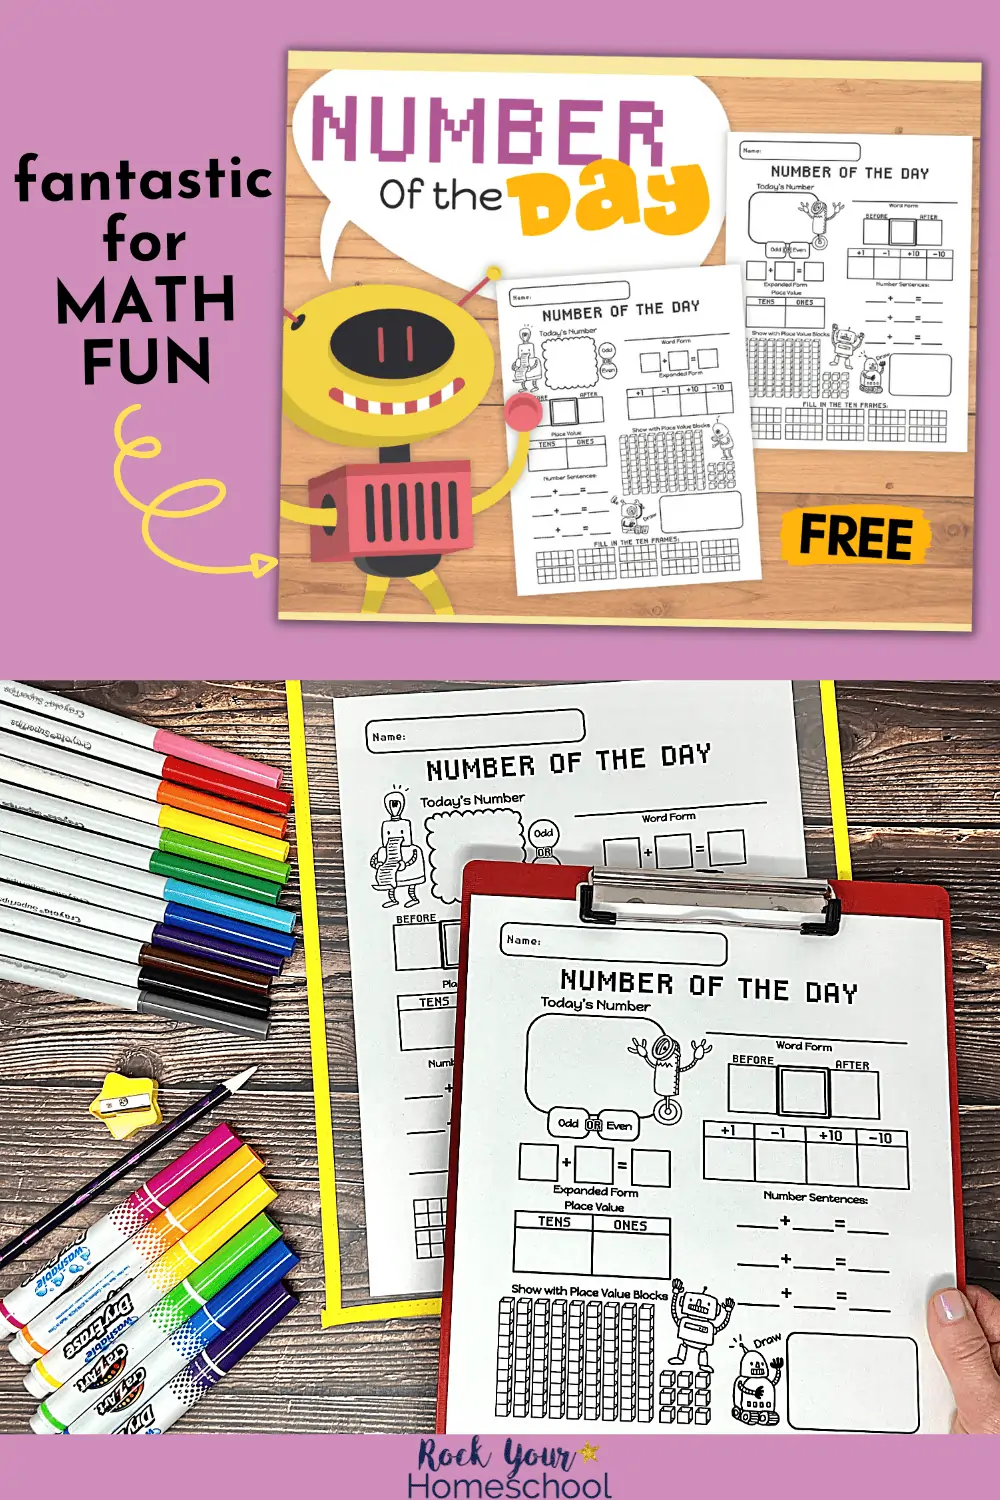 Number of the Day Printable Worksheets for Fantastic Math Fun (Free)